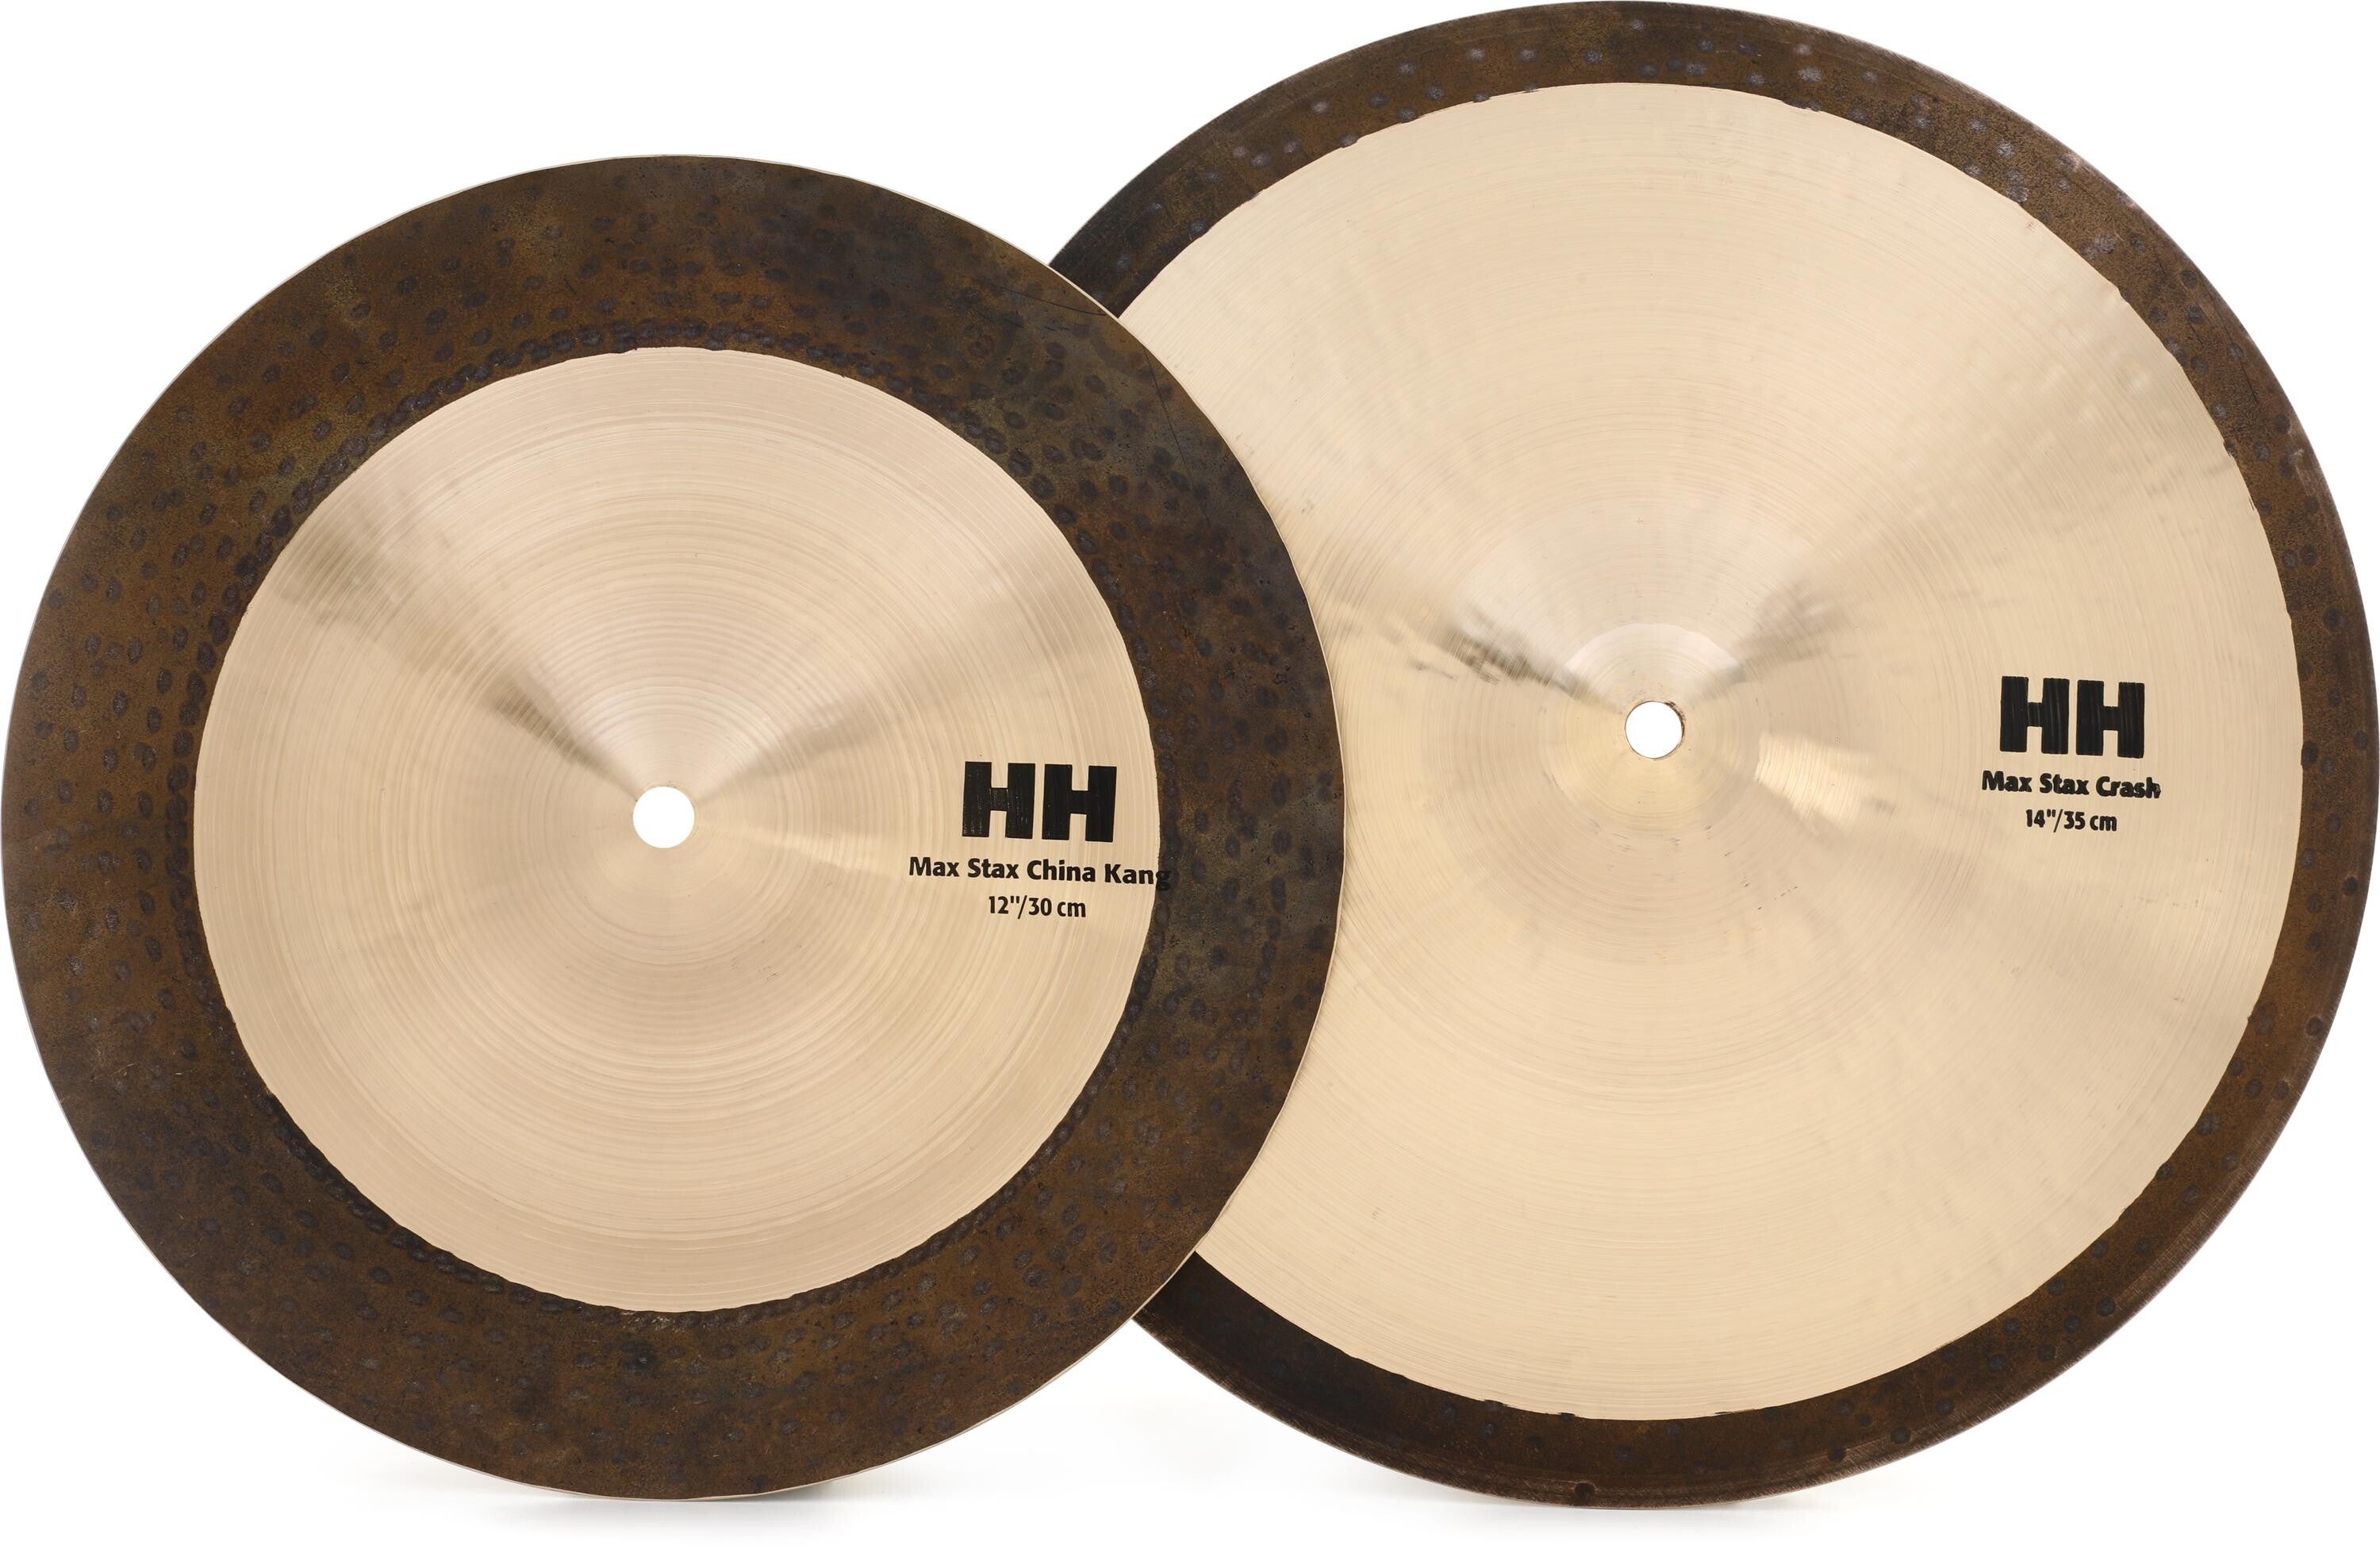 Sabian 14-inch HH Low Max Stax Cymbals